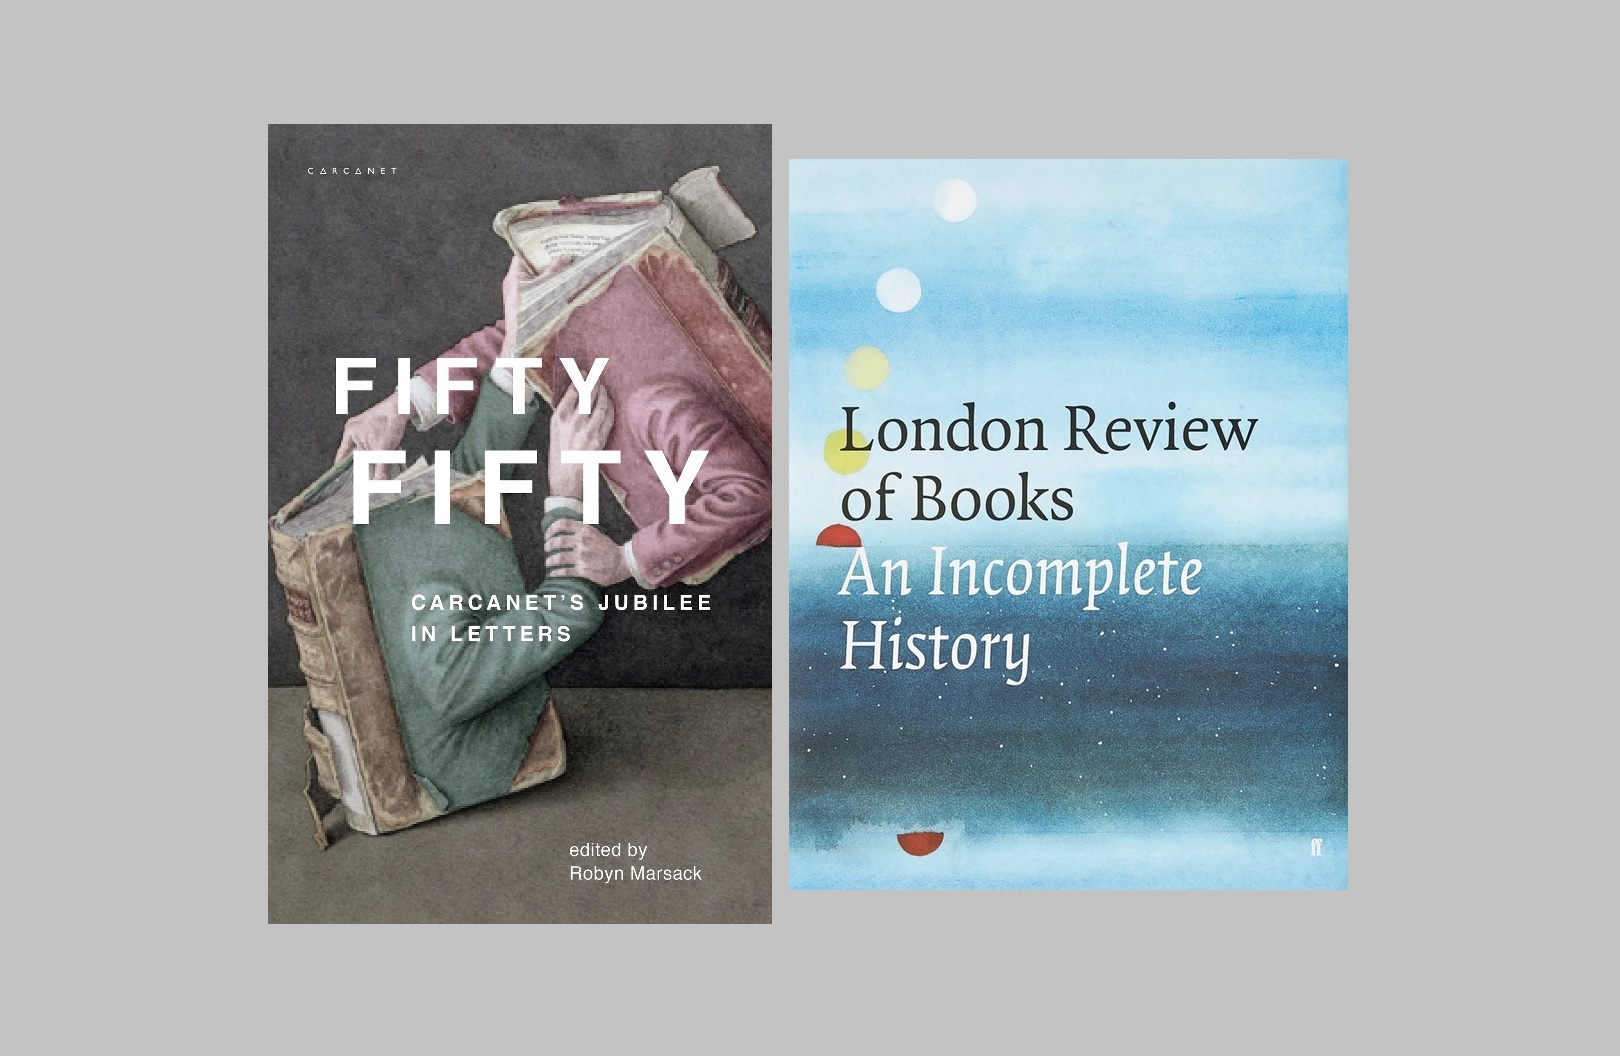 Fifty Forty: on the incomplete histories of Carcanet and the LRB